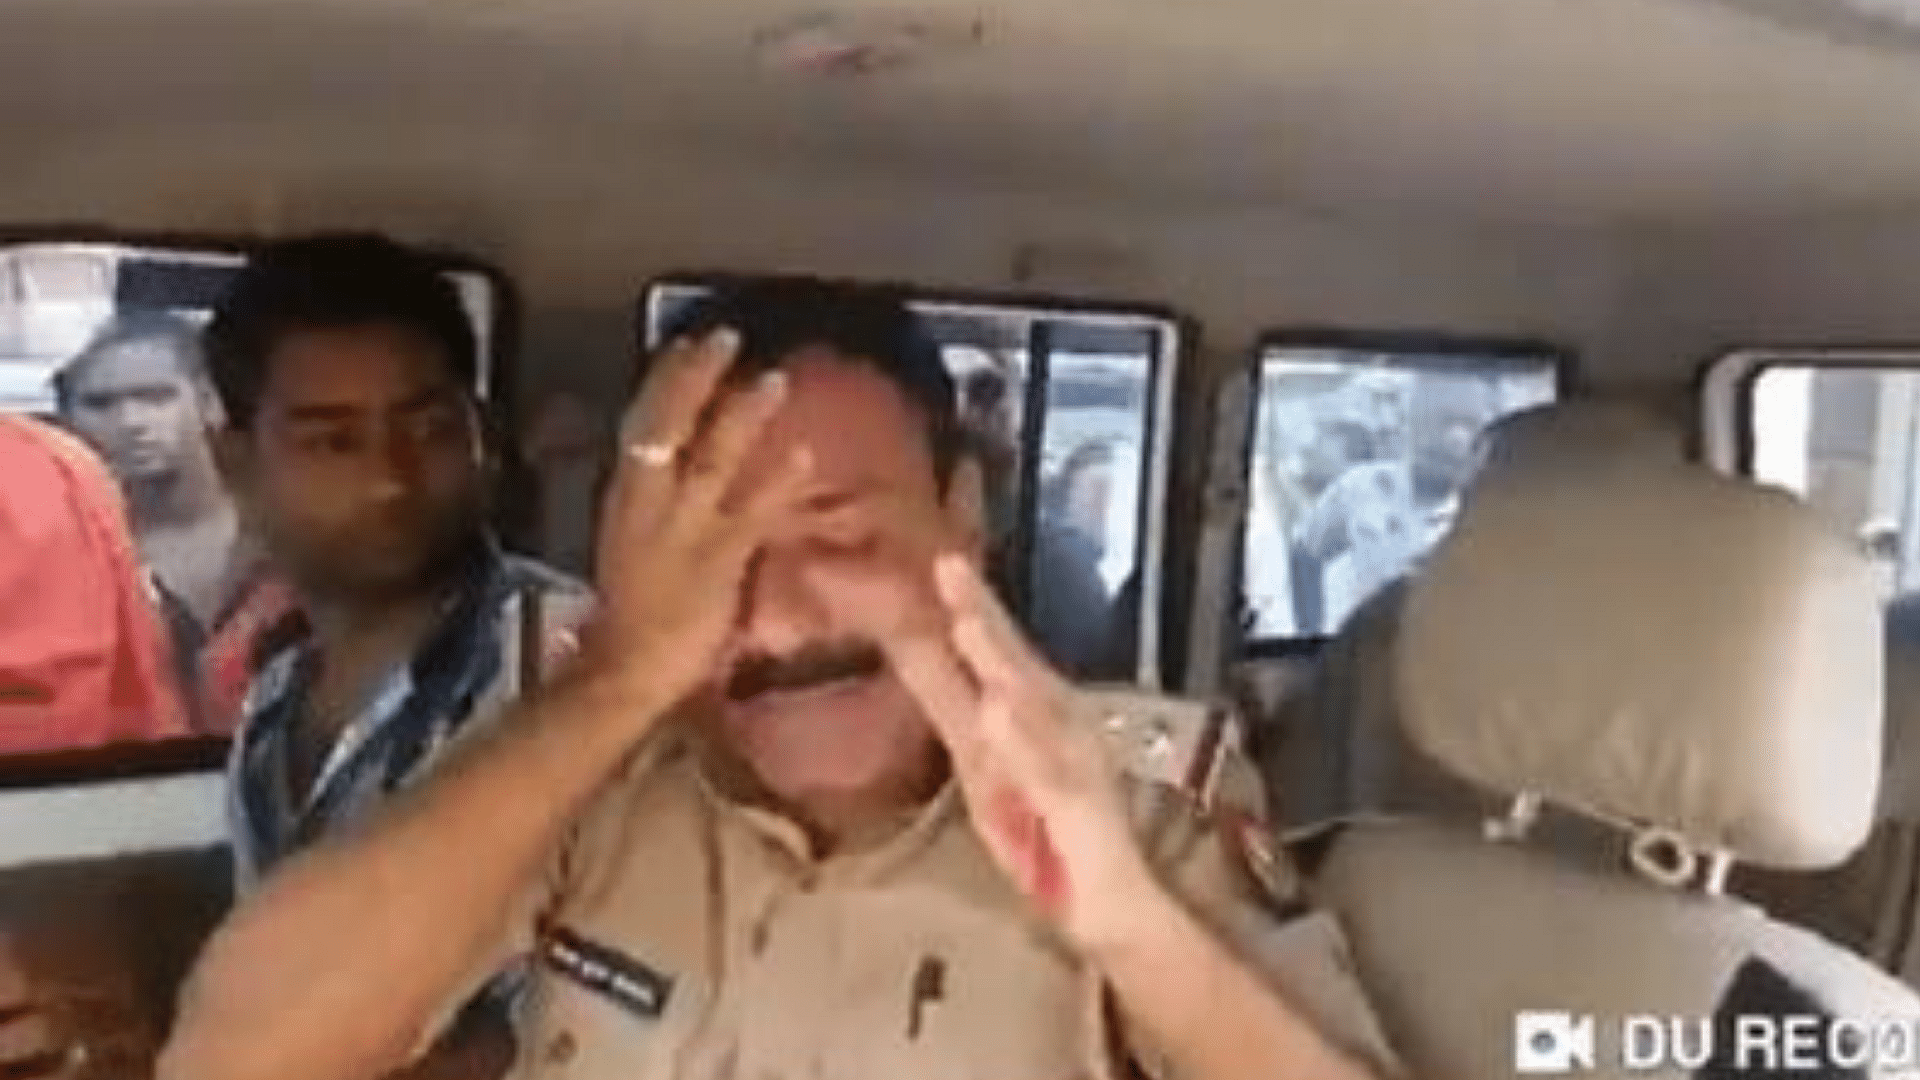  Officer with the power corporation Deepak Srivastava was allegedly thrashed by a mob on 9 June in Varanasi.